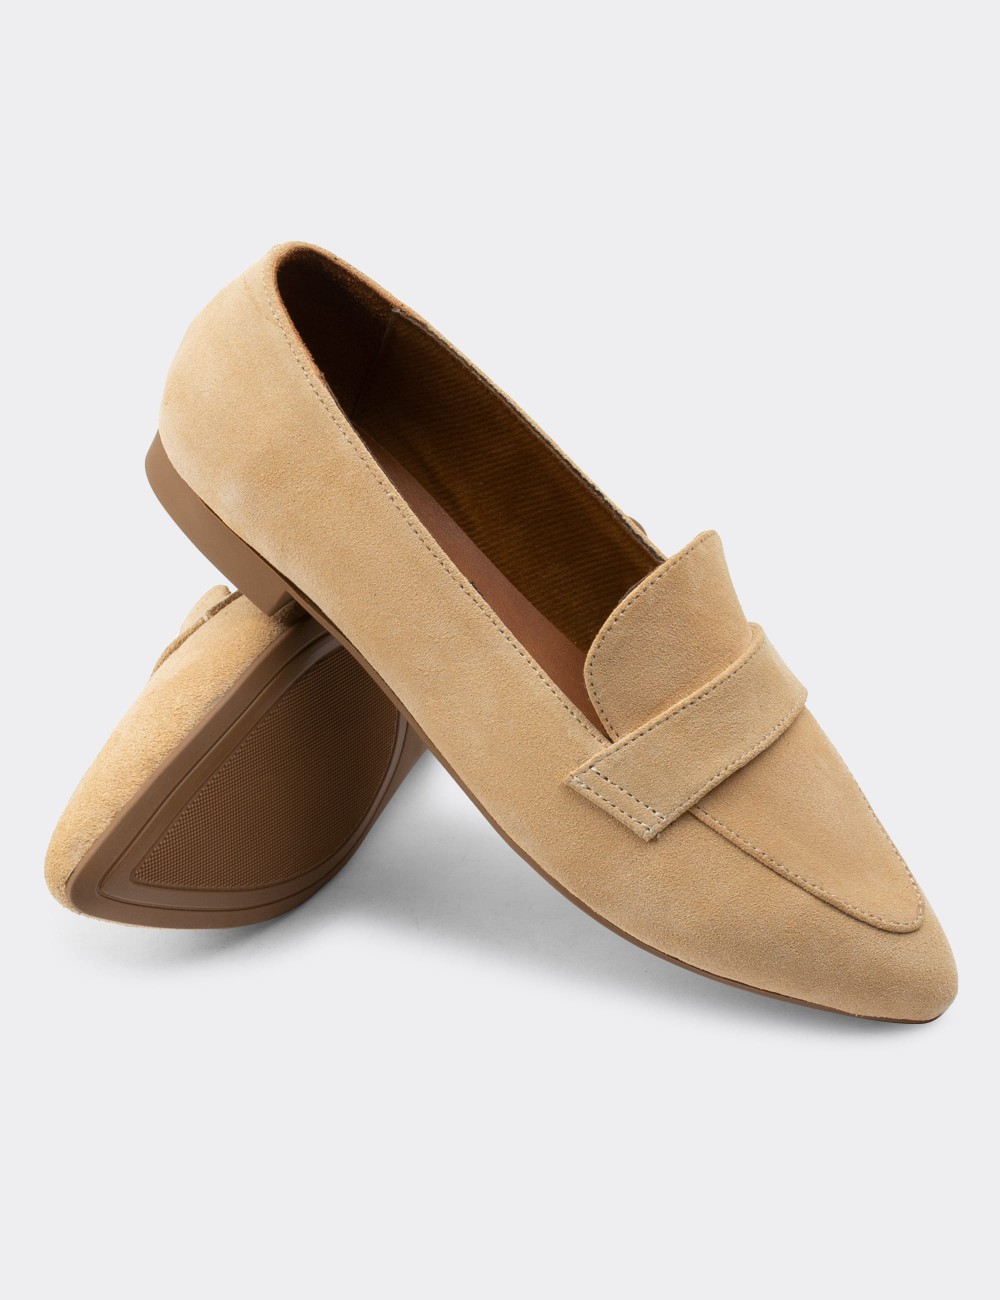 Beige Suede Leather Loafers - 01897ZBEJC01